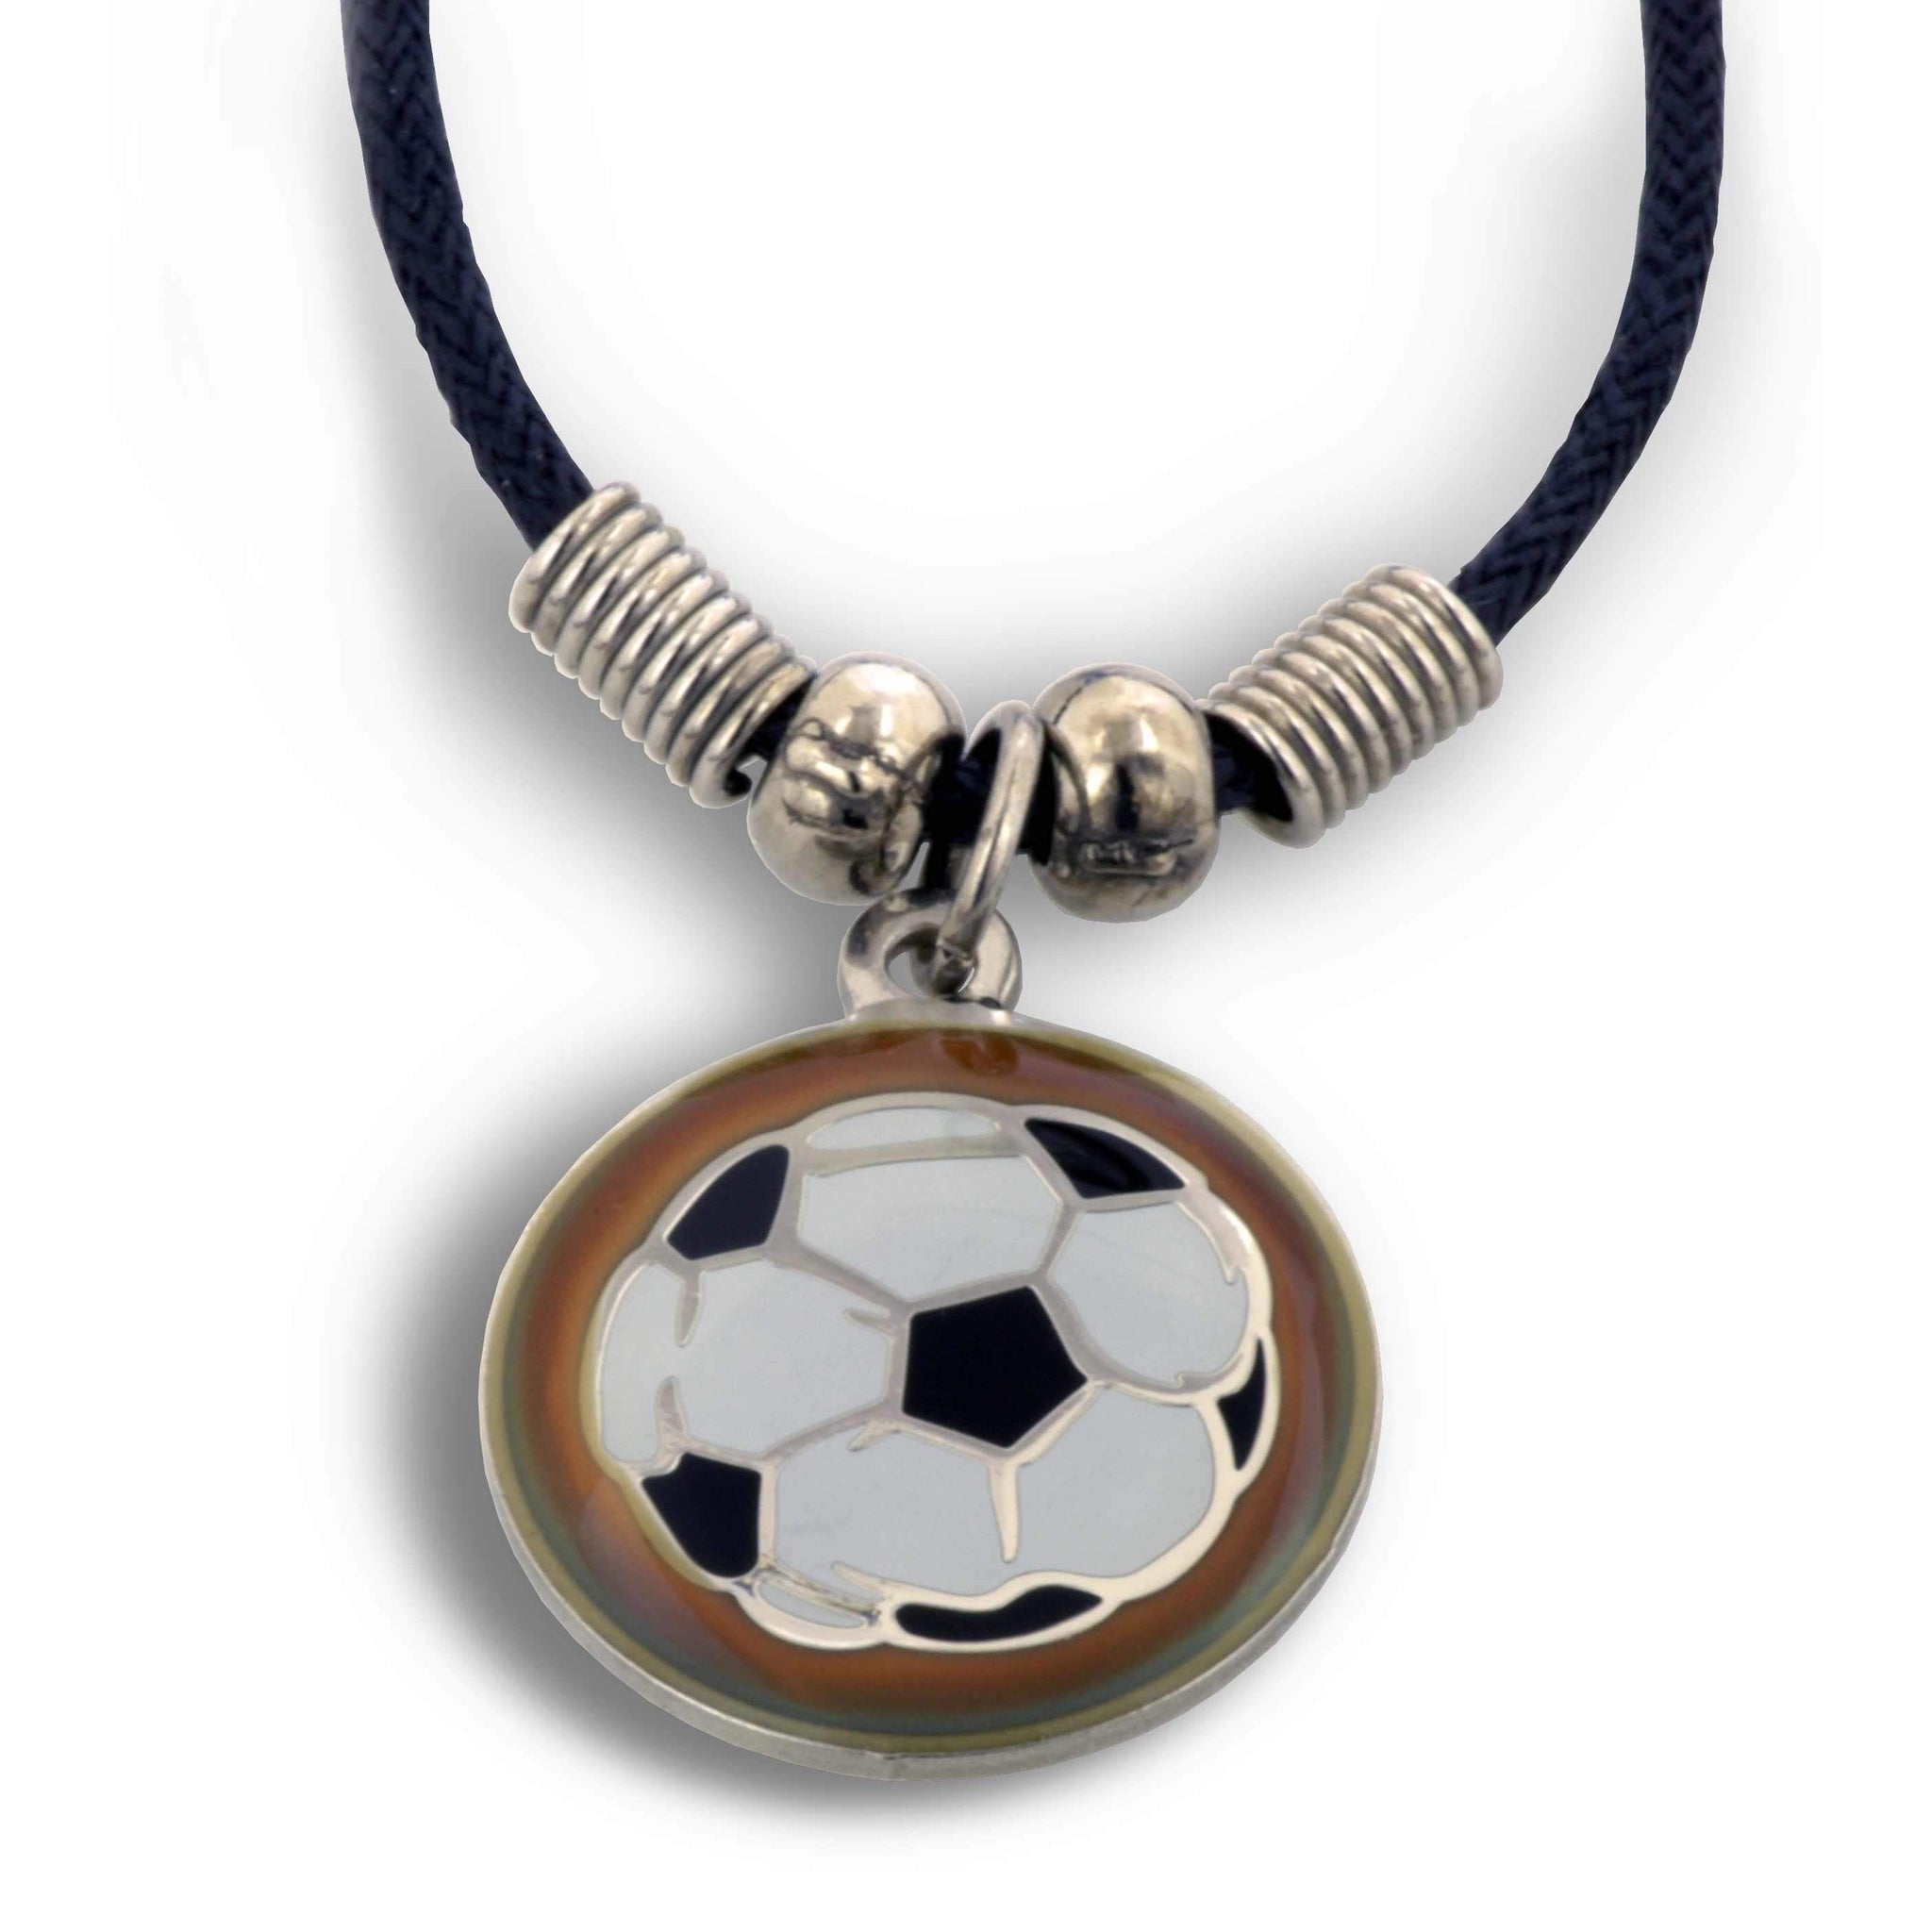 Soccer Mood Phil 413 Necklace - Forgiven Jewelry